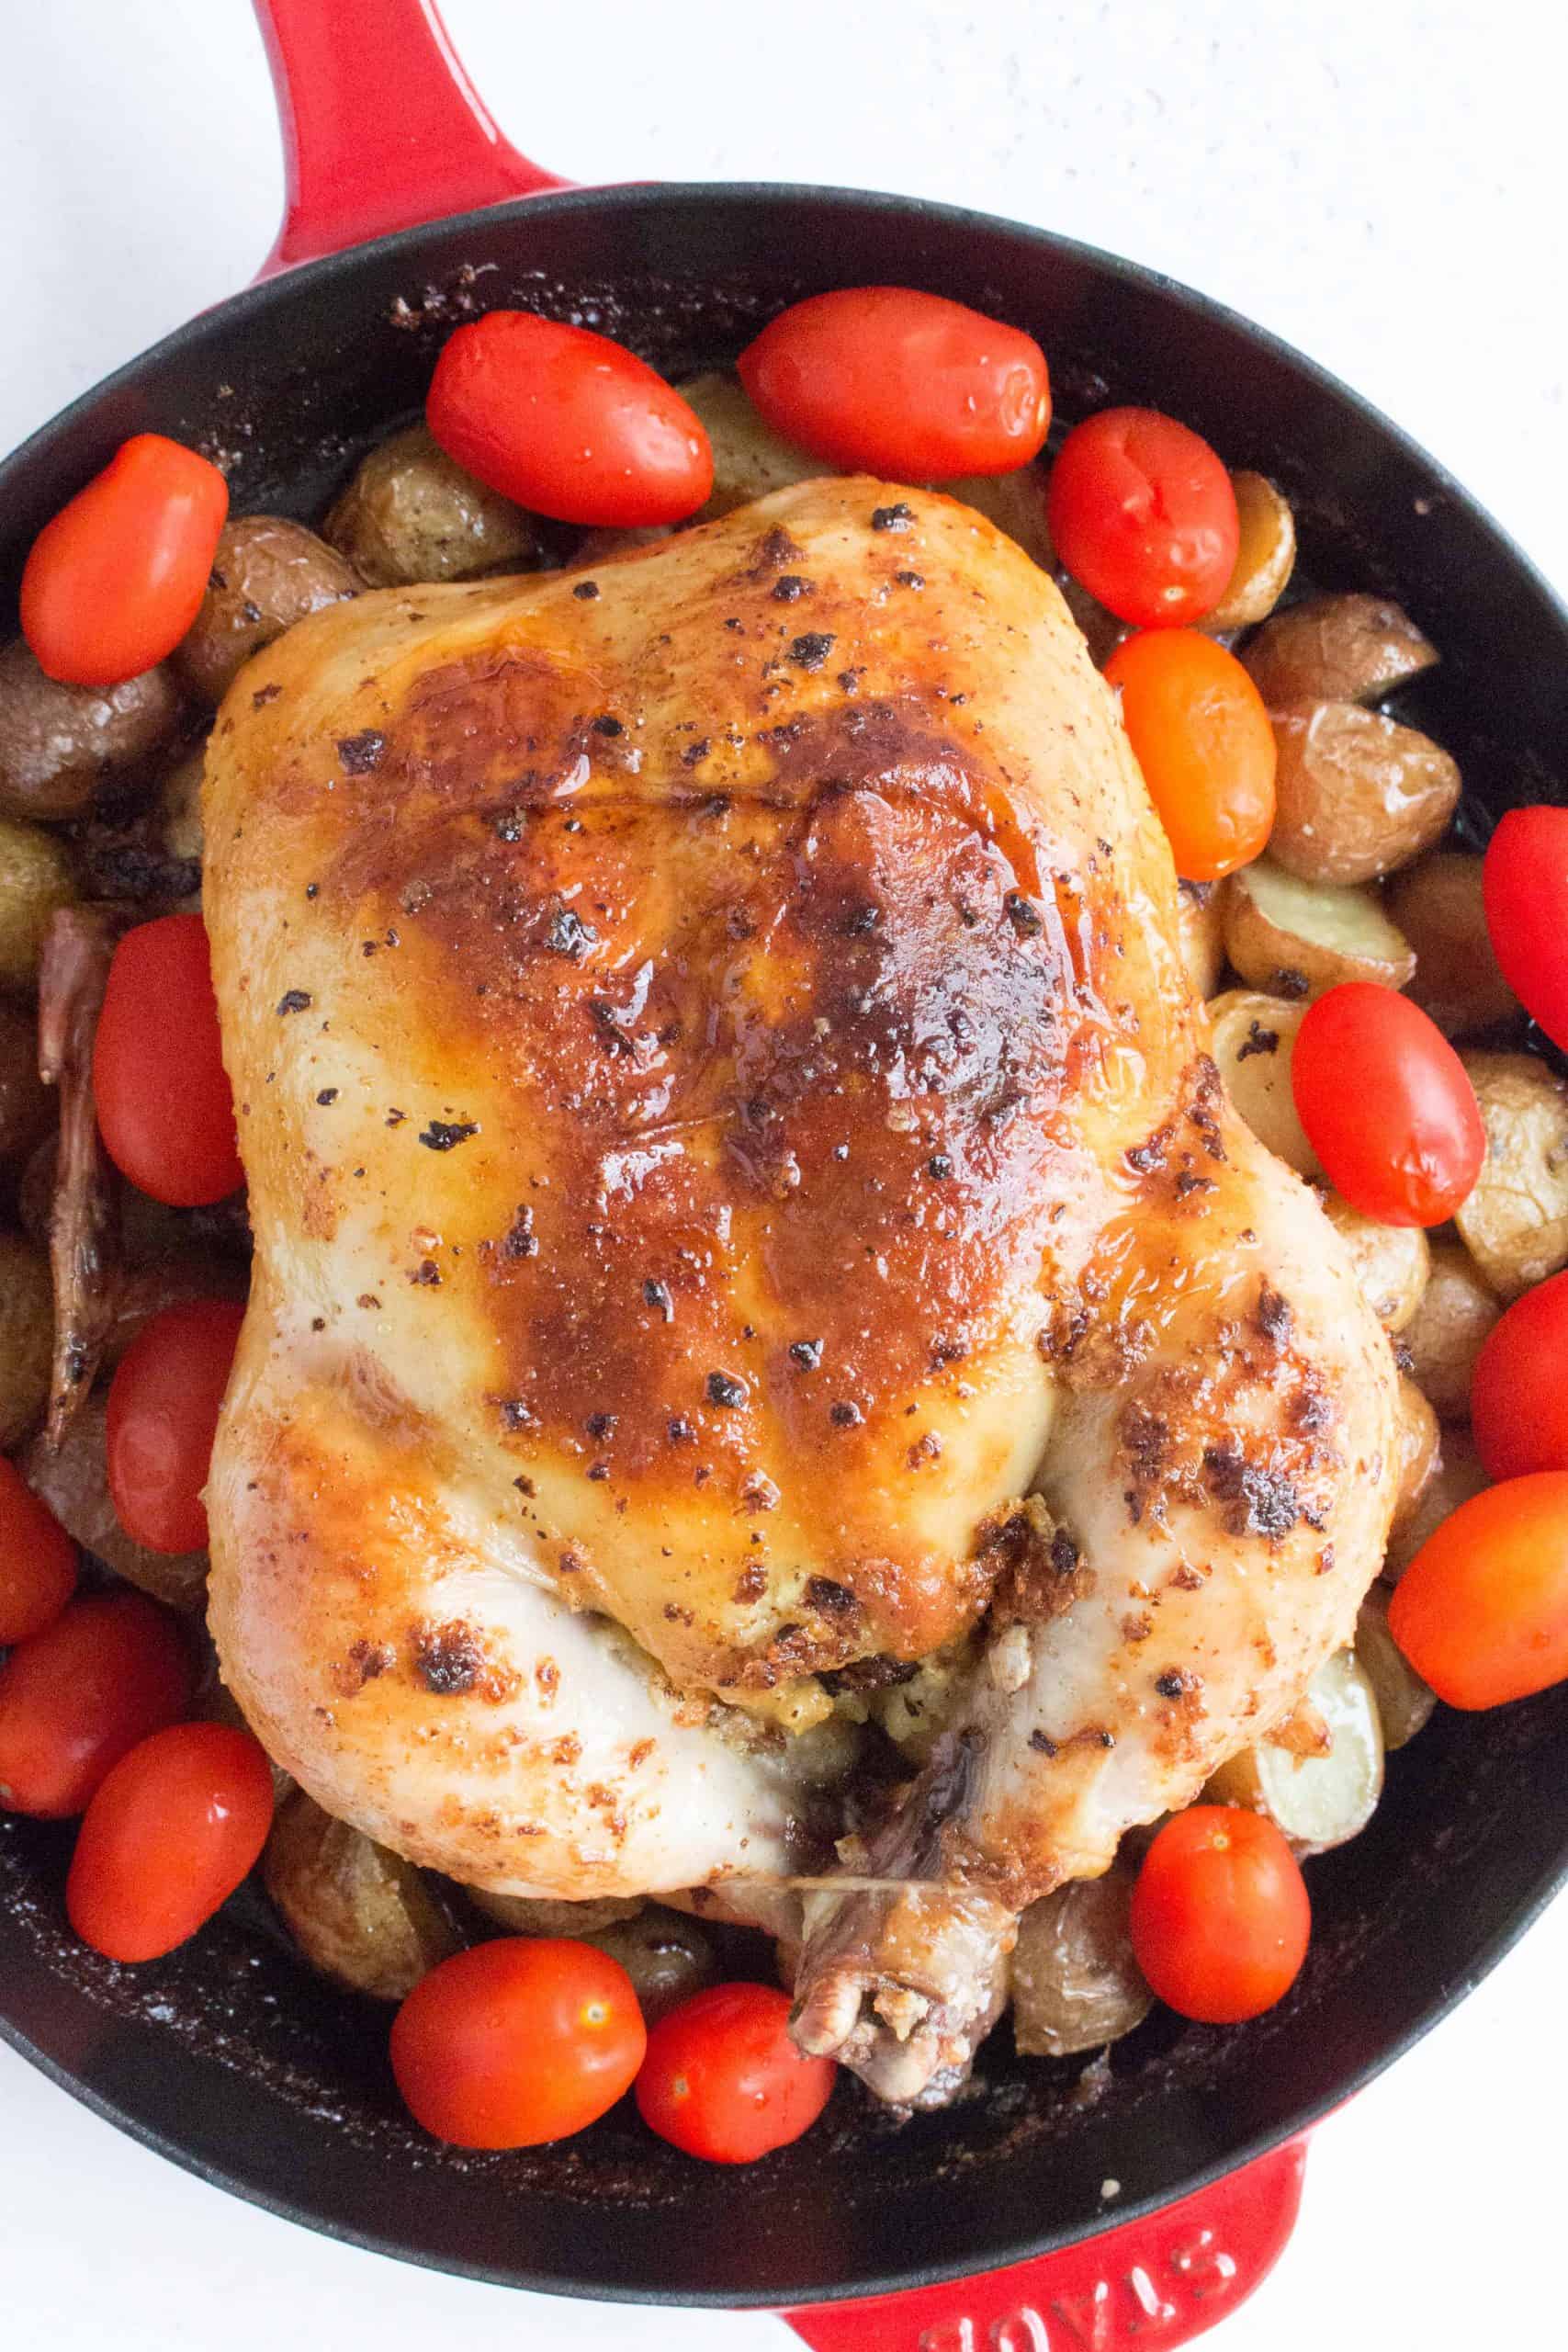 Whole Roast Chicken Inside A Red Cast Iron Skillet Surrounded By Baby Potatoes And Tomatoes